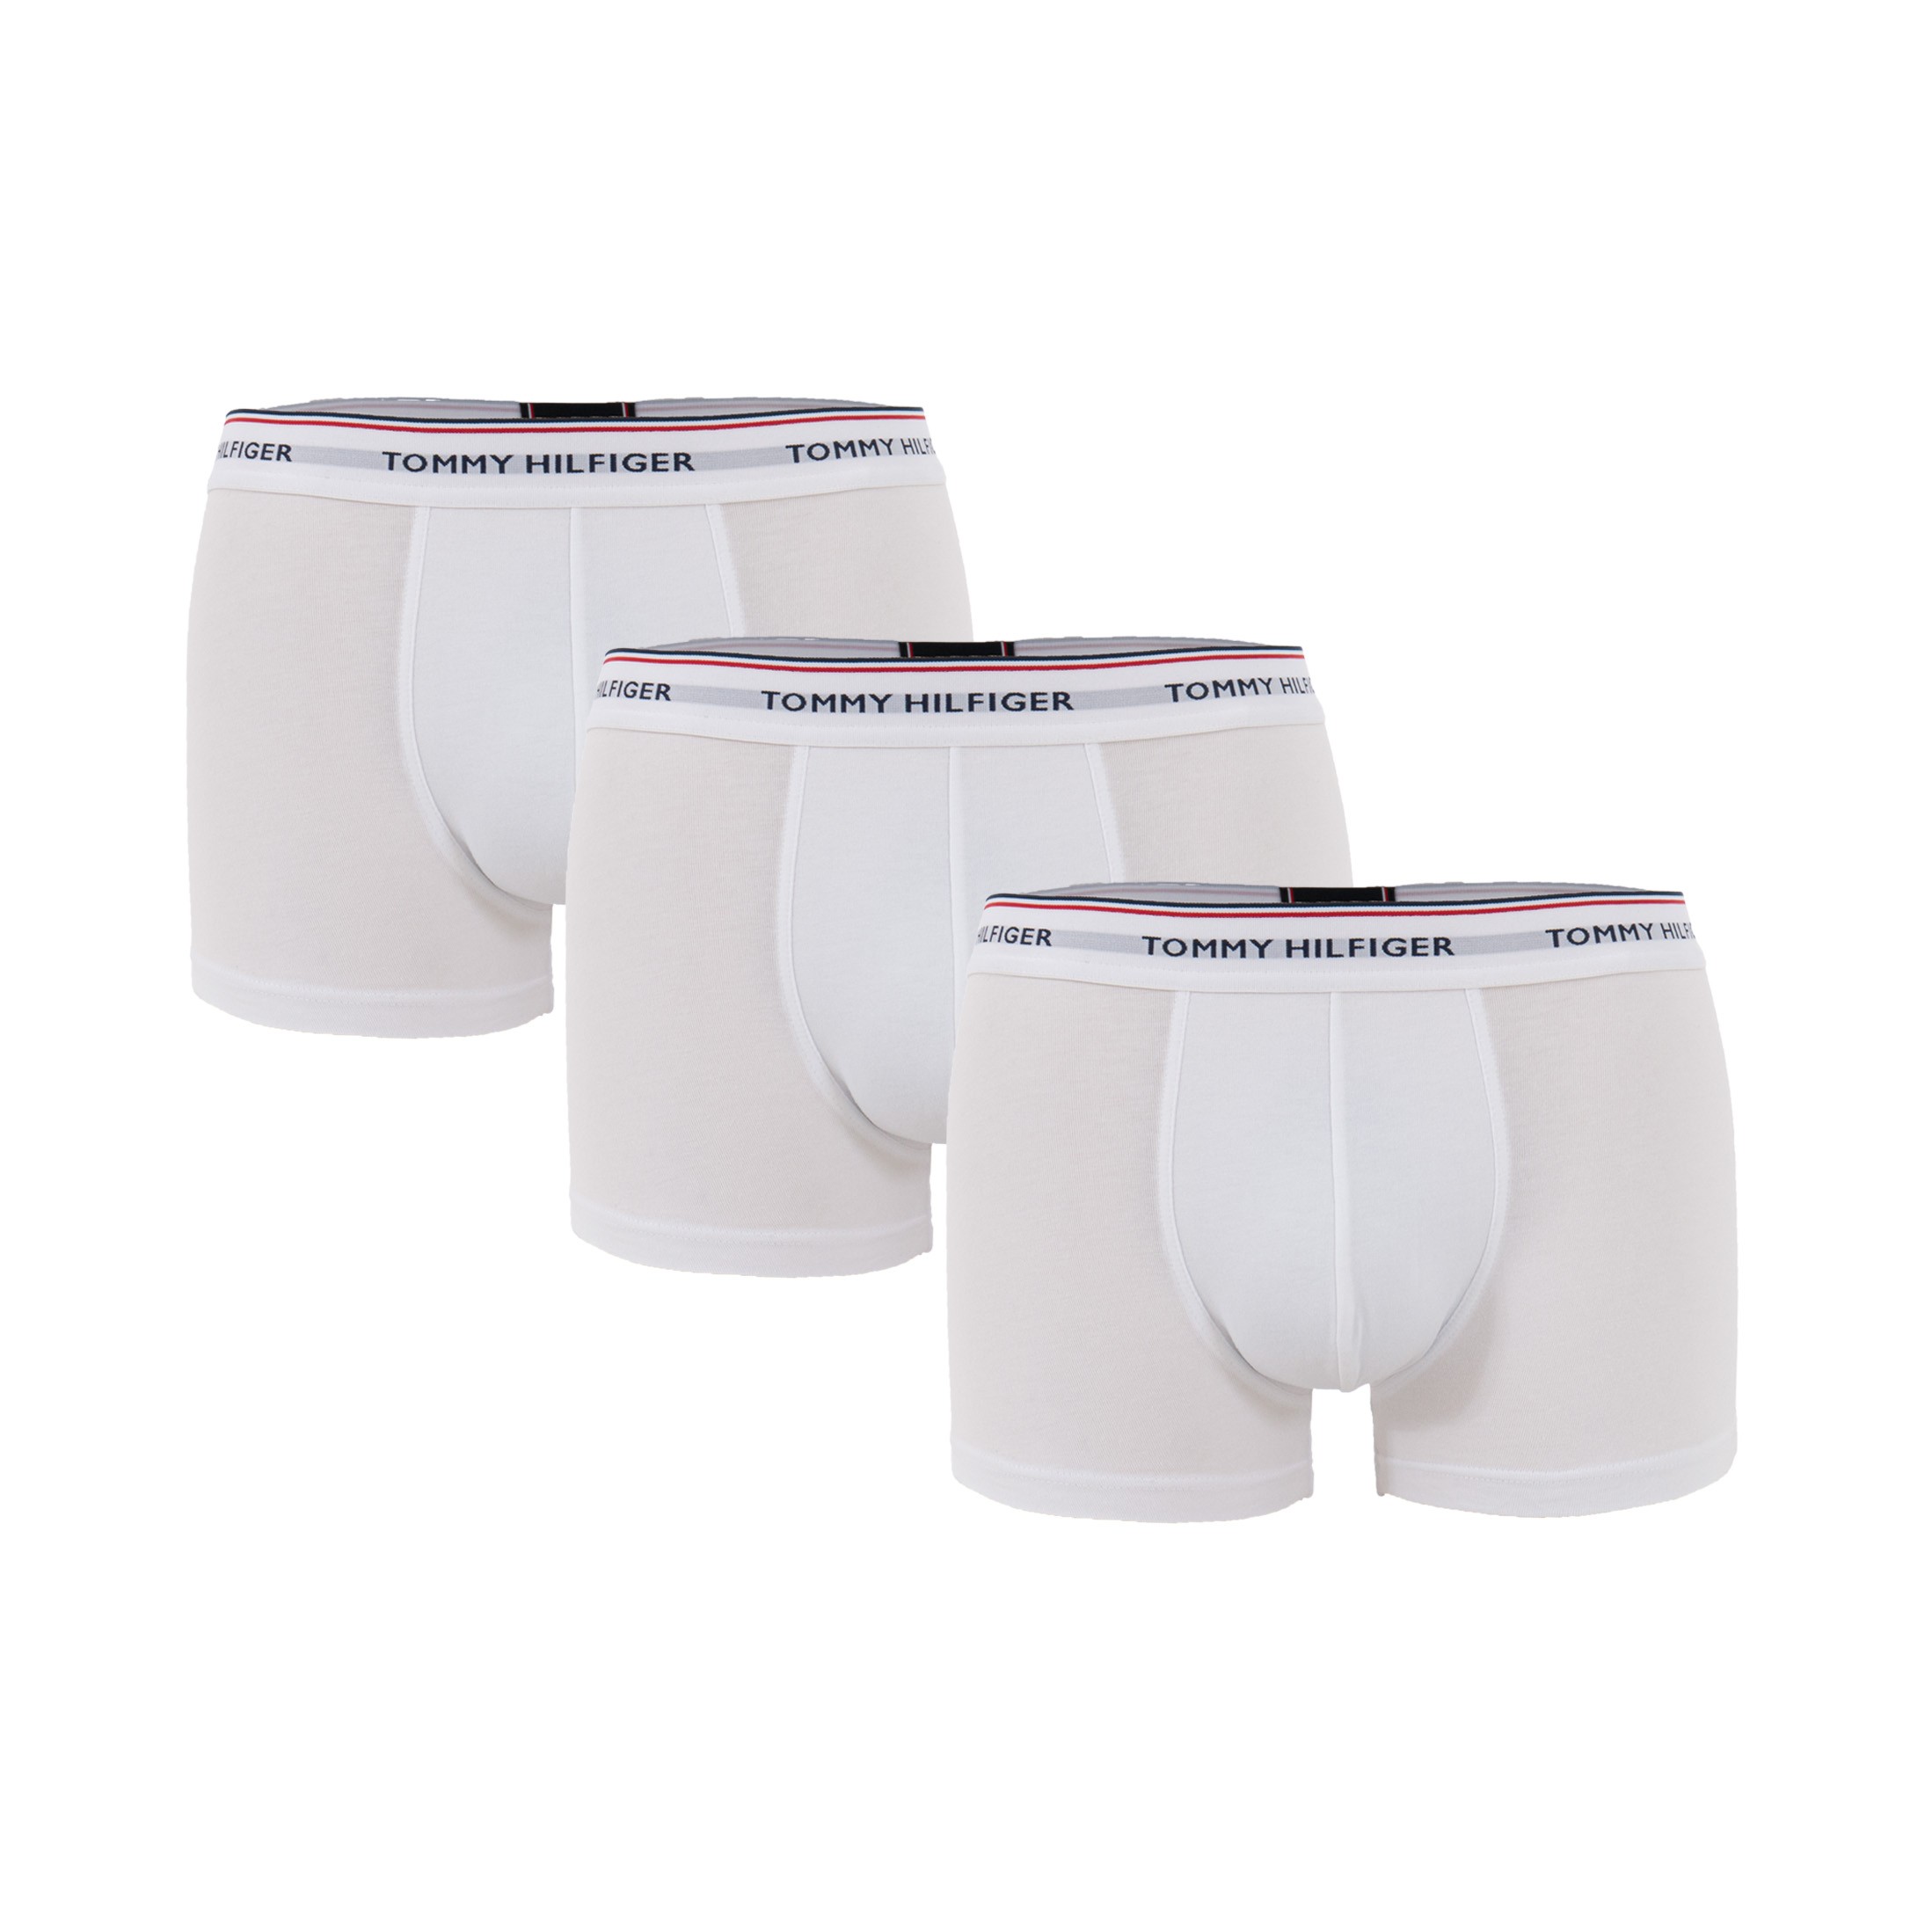 Lot of 3 cotton Stretch boxers Tommy Hilfiger - white: Packs for ma